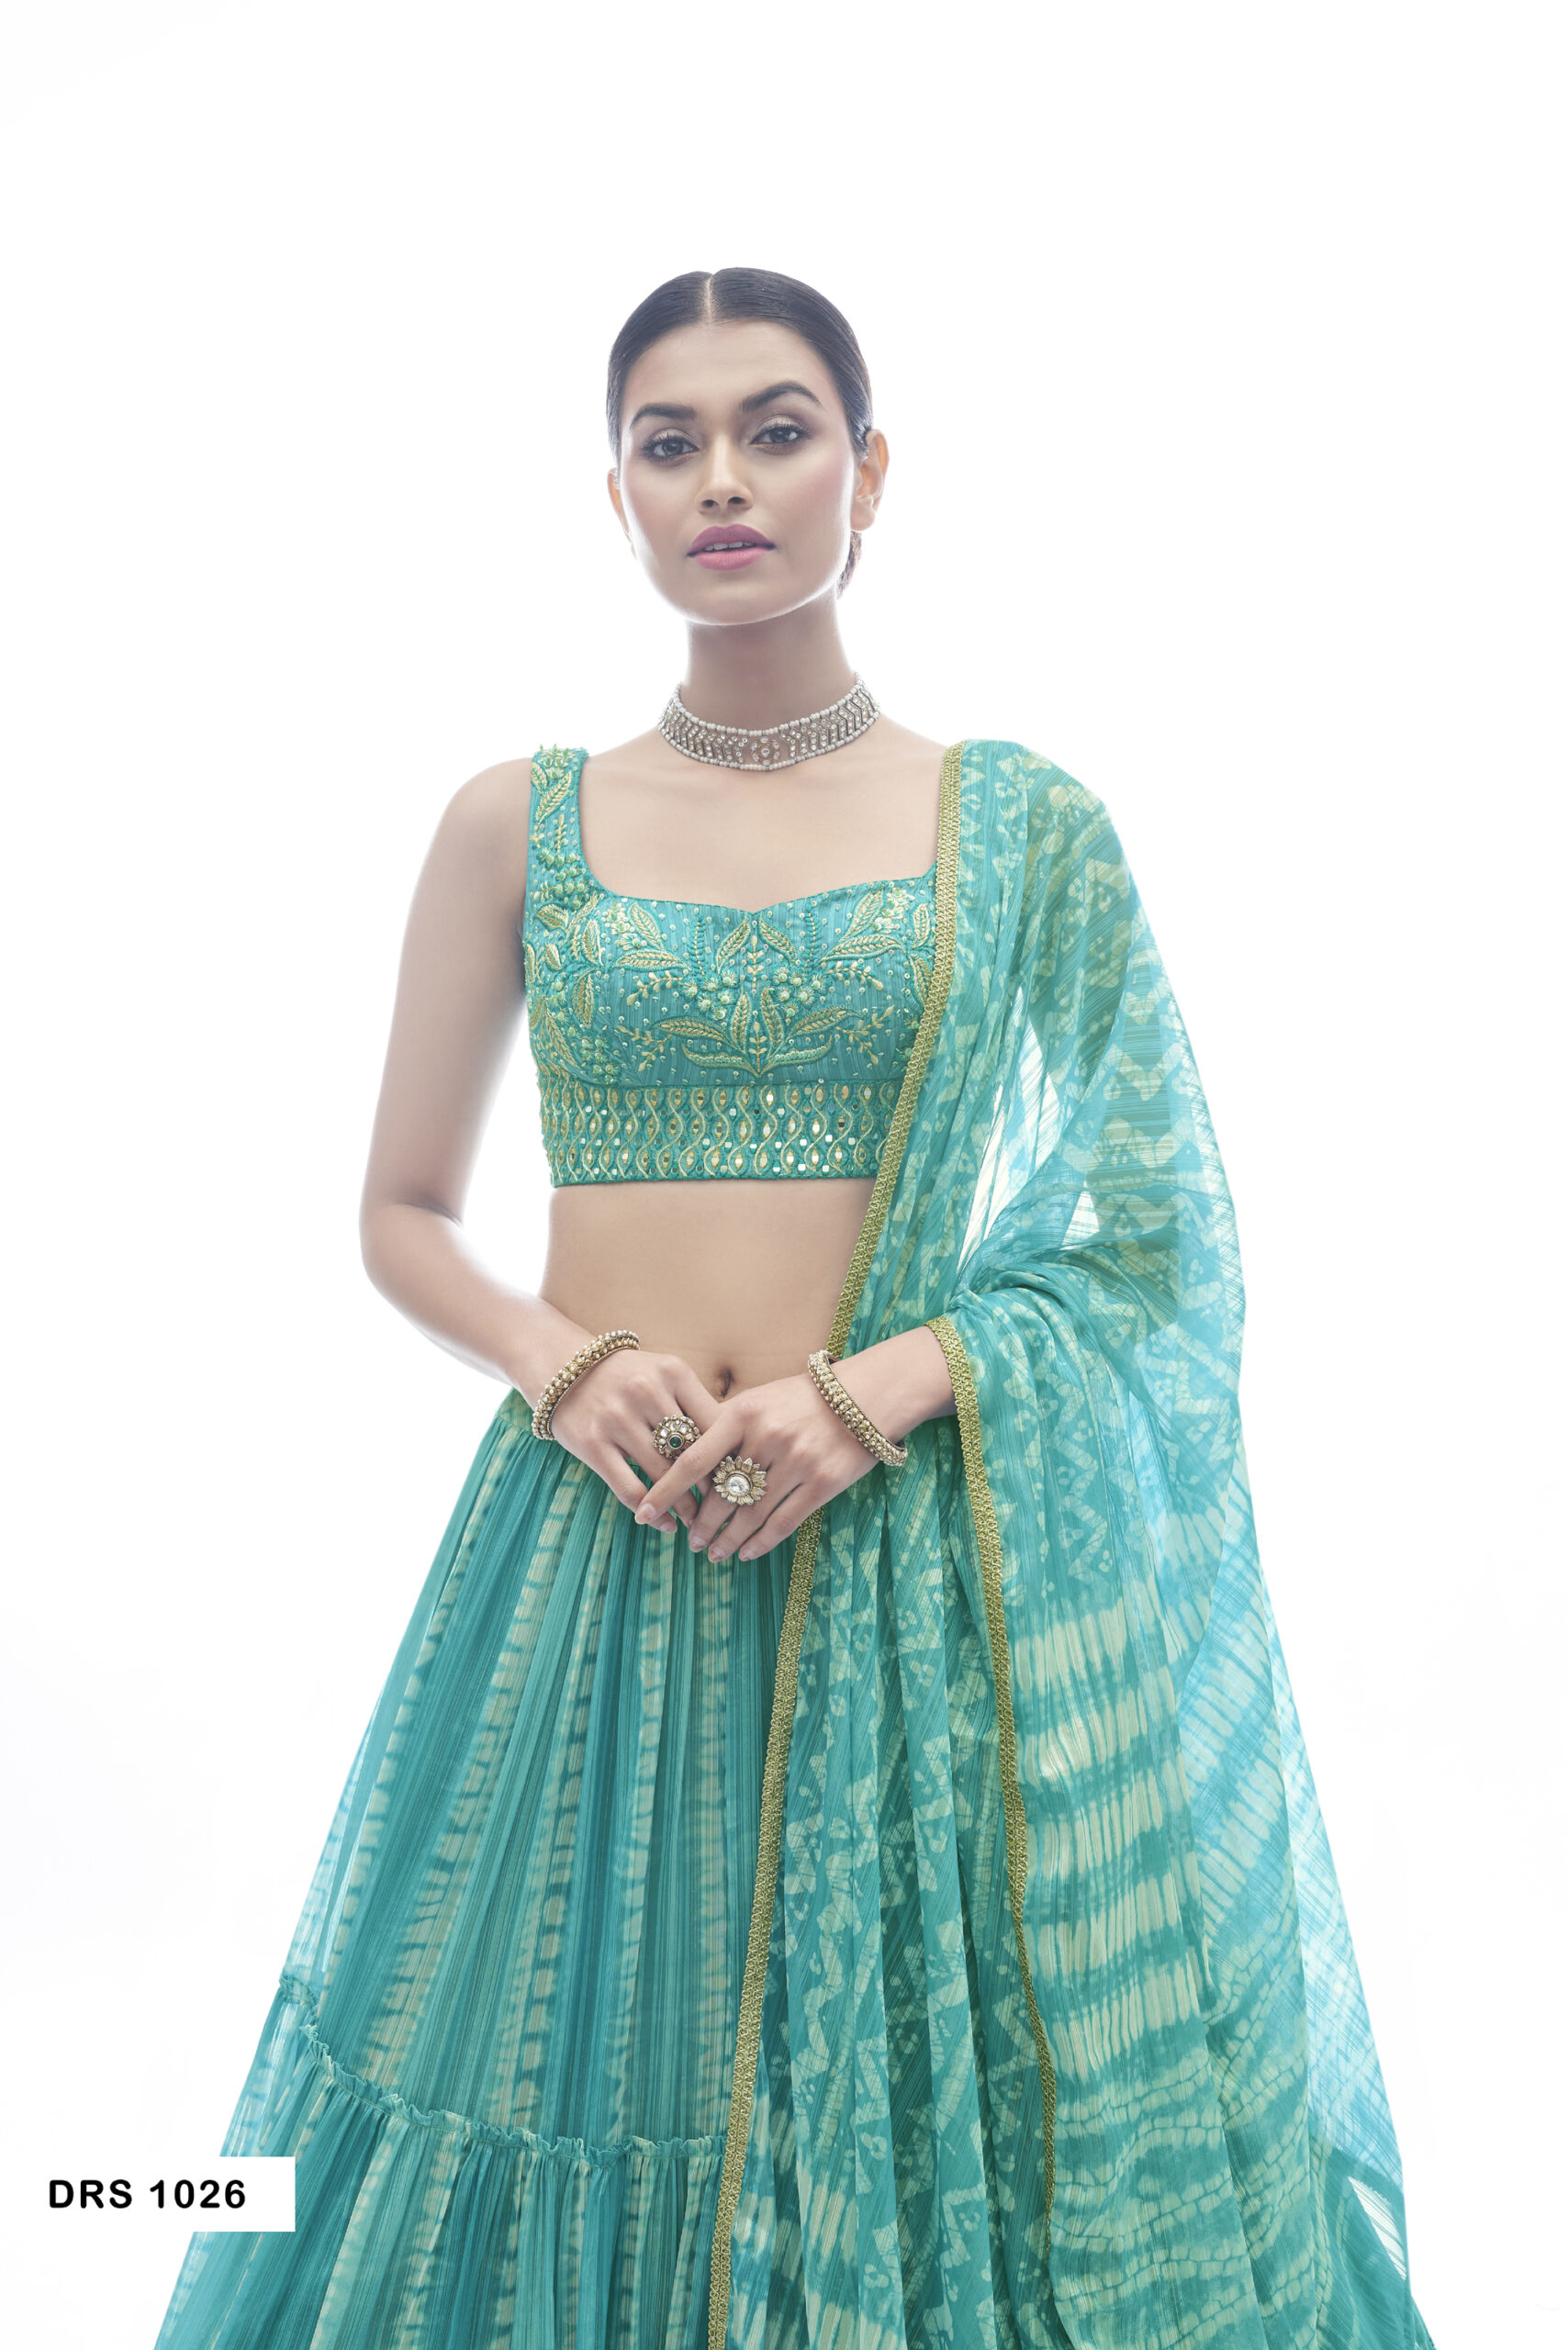 Fresh lehenga blouse designs - New Trending Ideas to give your choli a  modern look | Ruffle blouse designs, Latest lehenga blouse designs, Stylish  blouse design